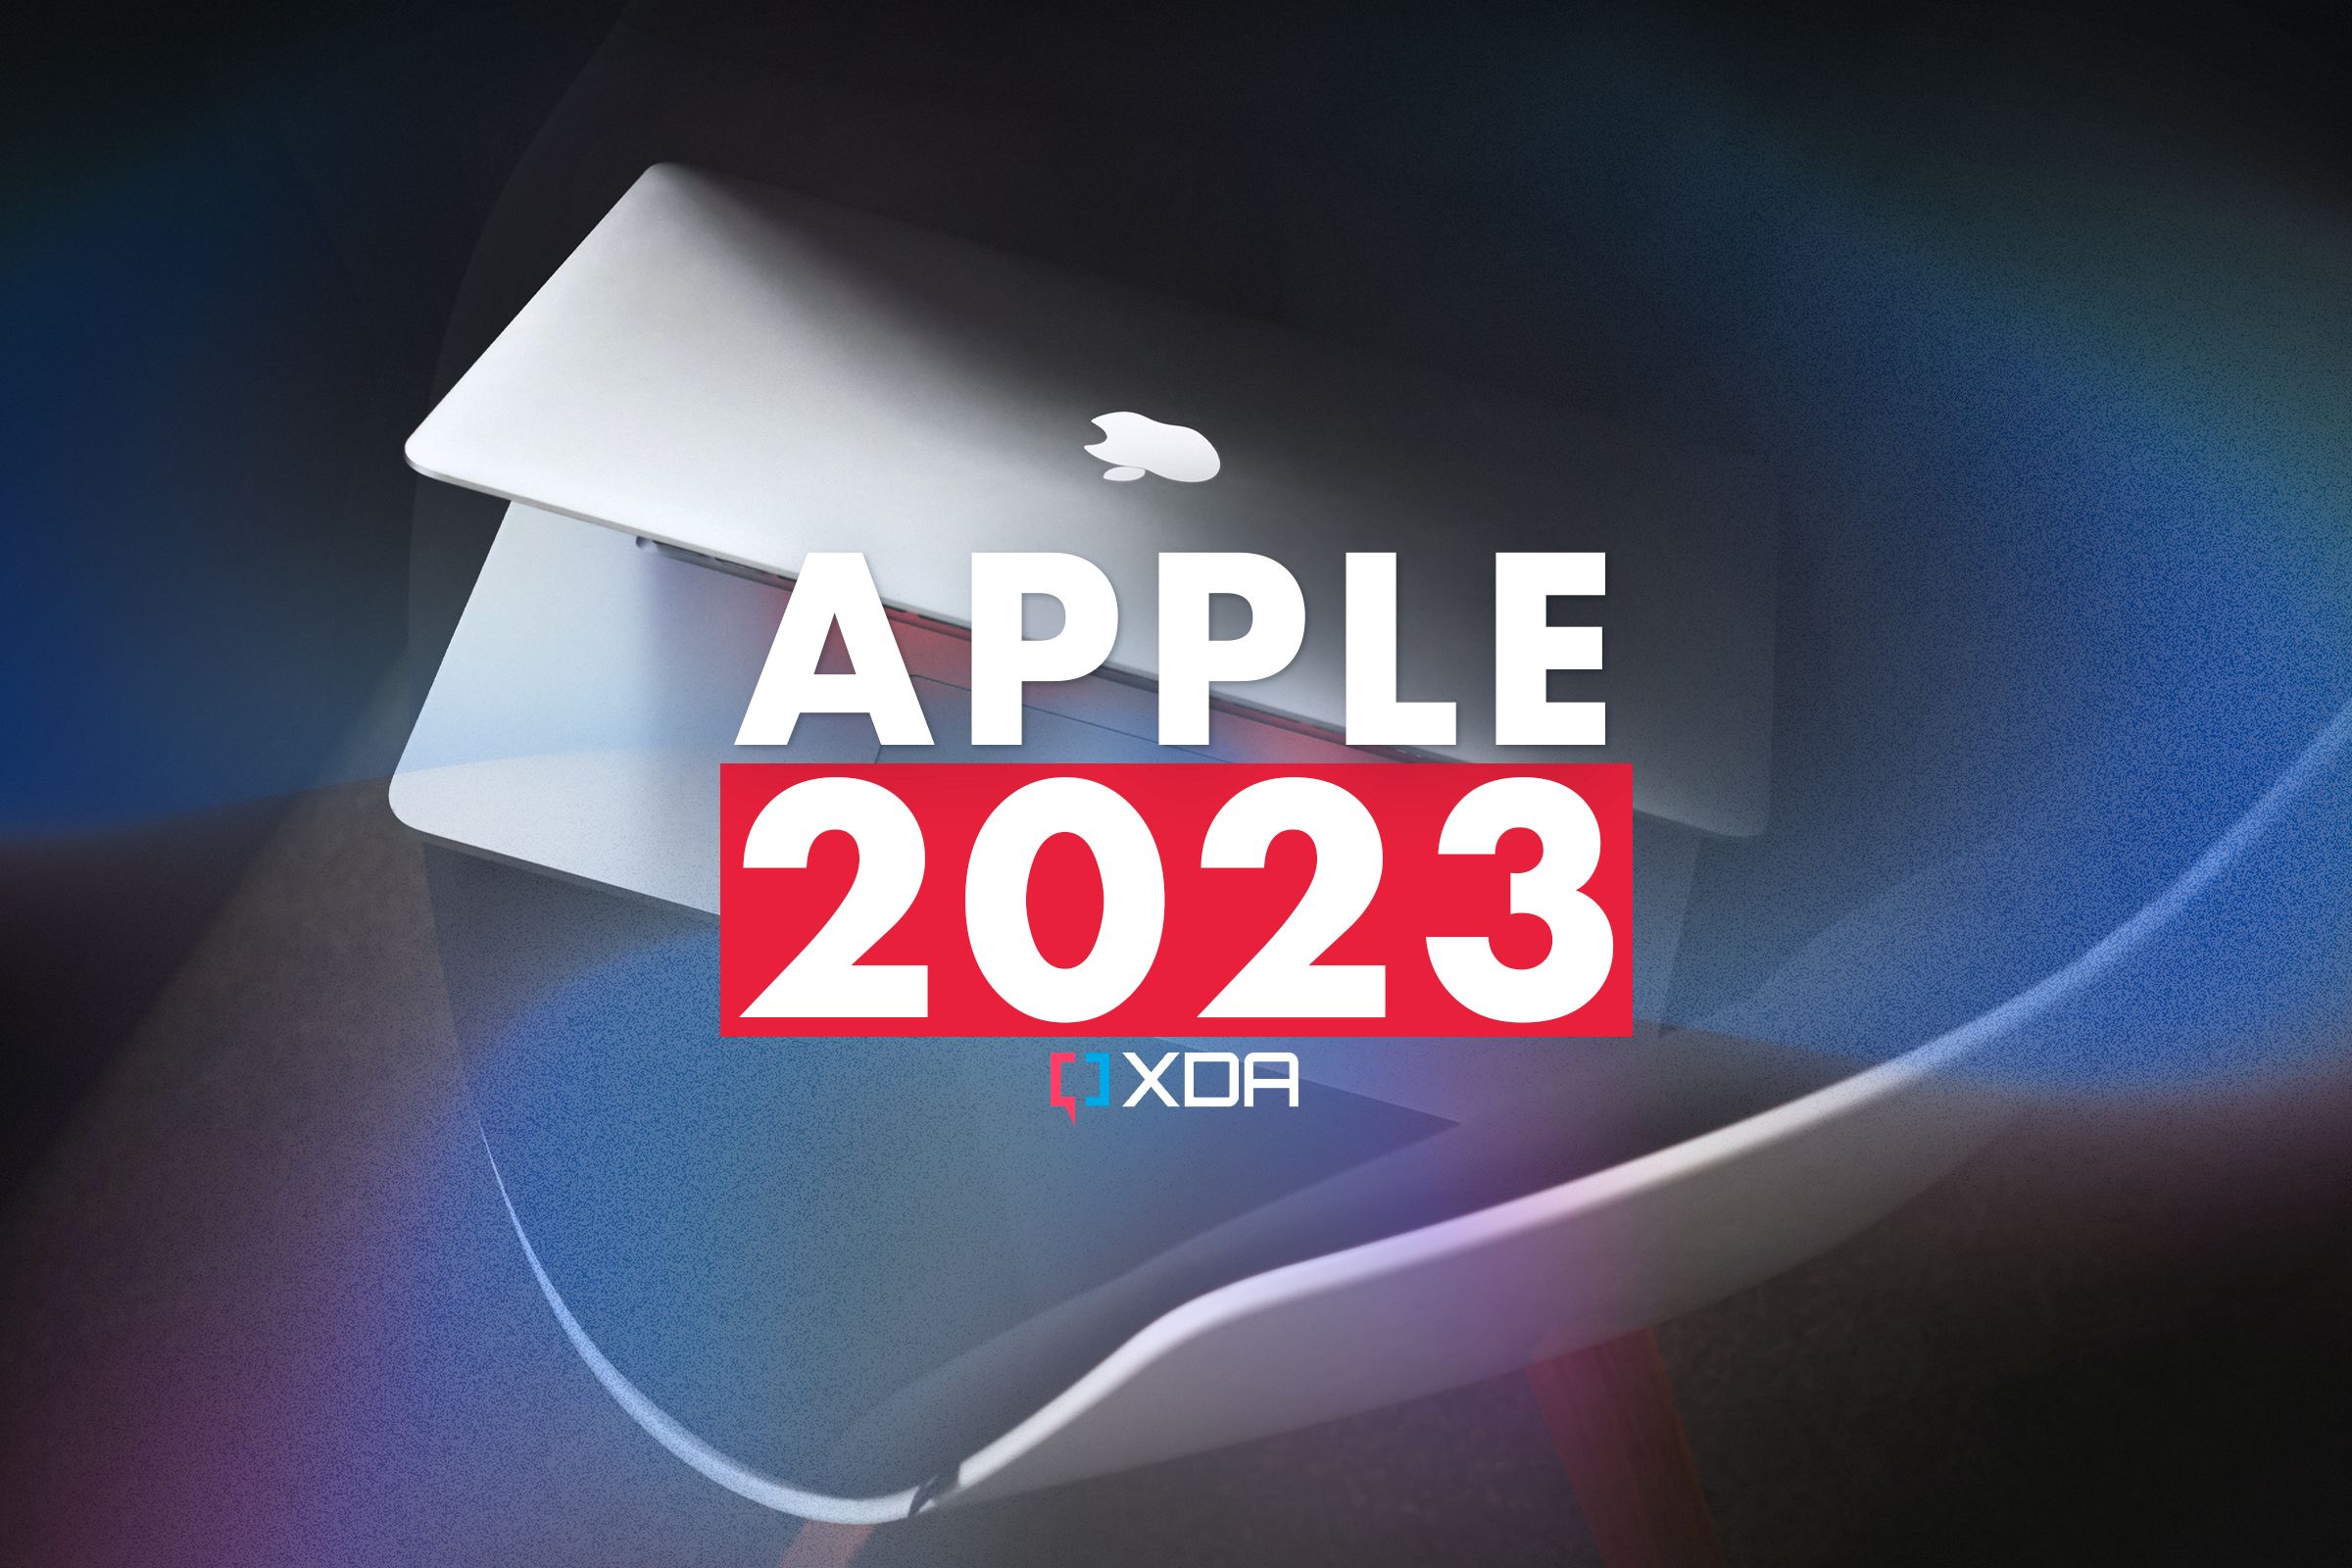 Apple in 2023 Predictions, rumors, and what we want to see in the new year